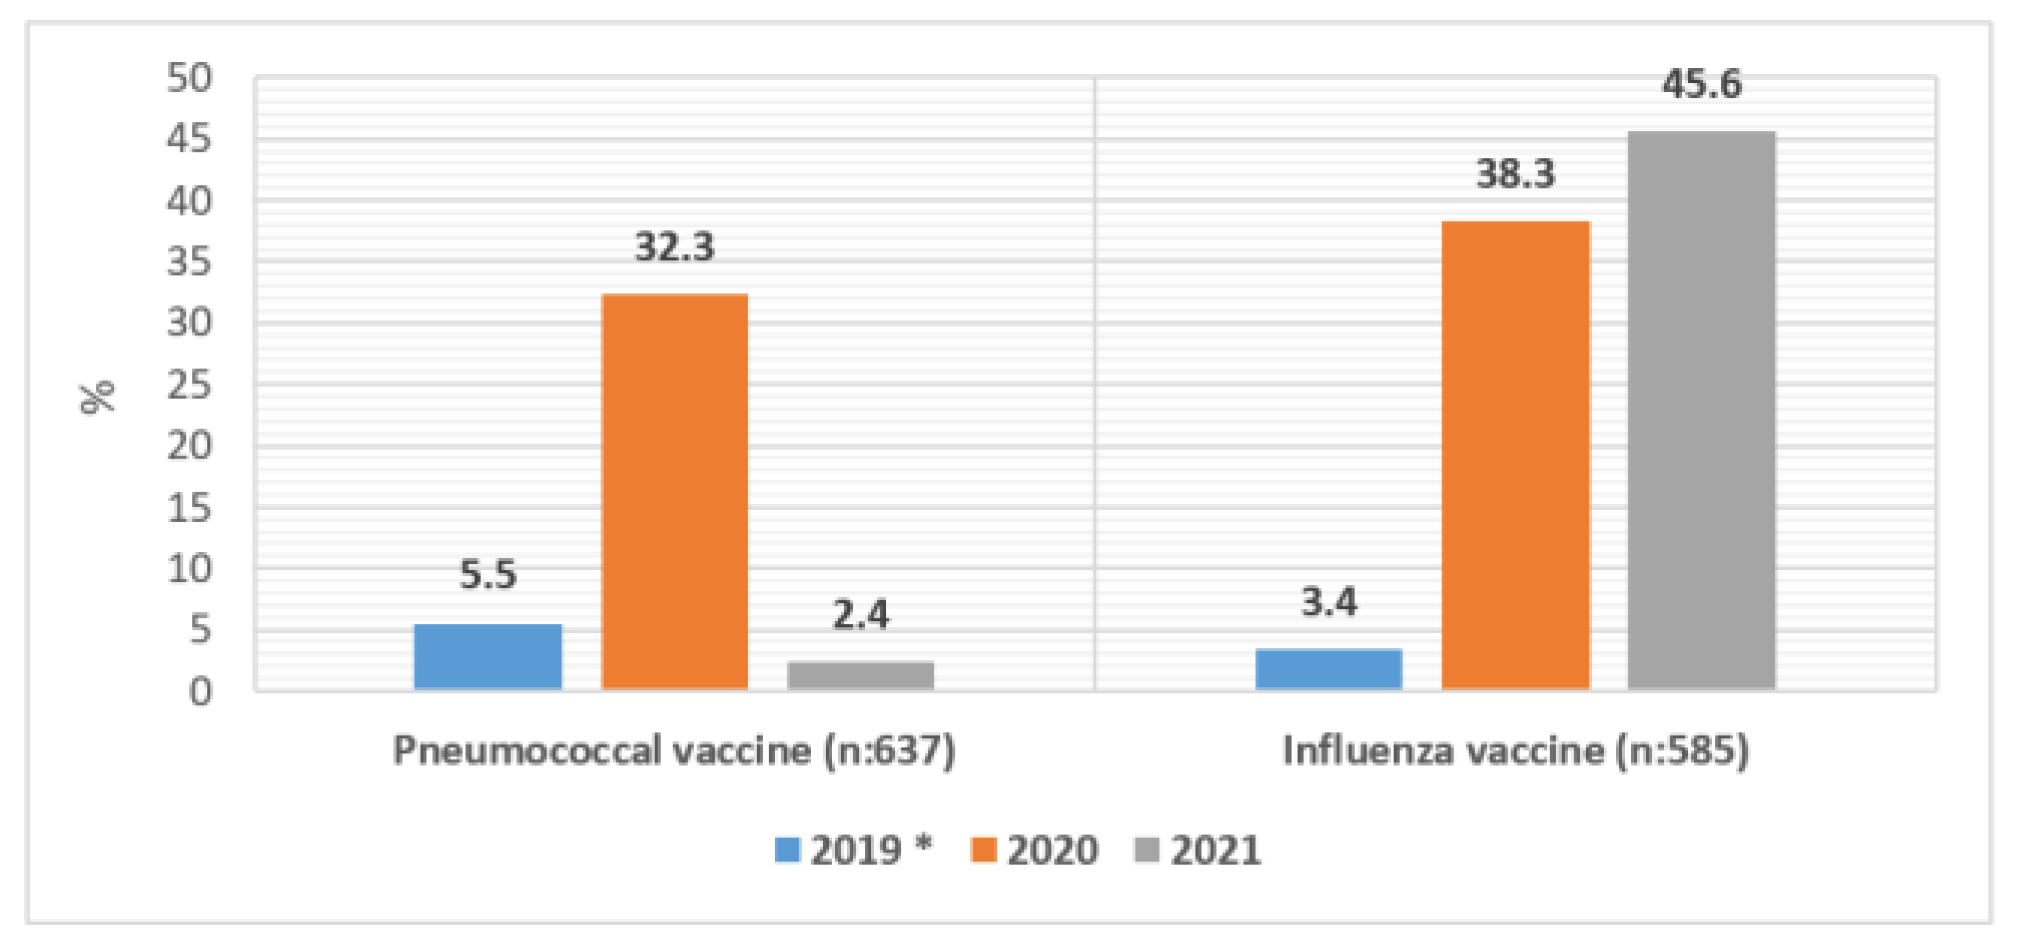 vaccines-free-full-text-the-effect-of-pneumococcal-influenza-and